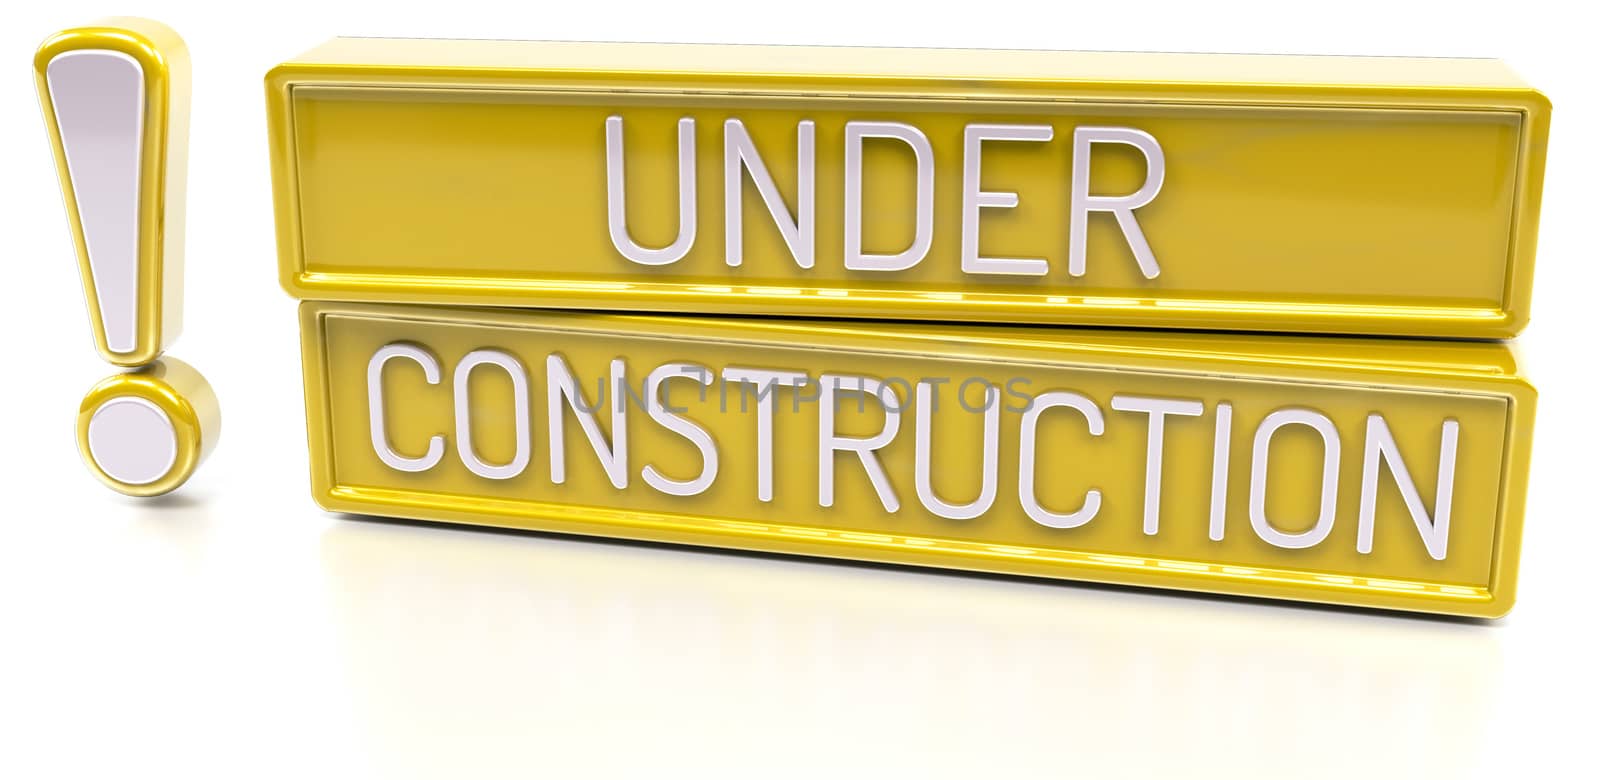 Under Construction - 3d banner, isolated on white background by akaprinay